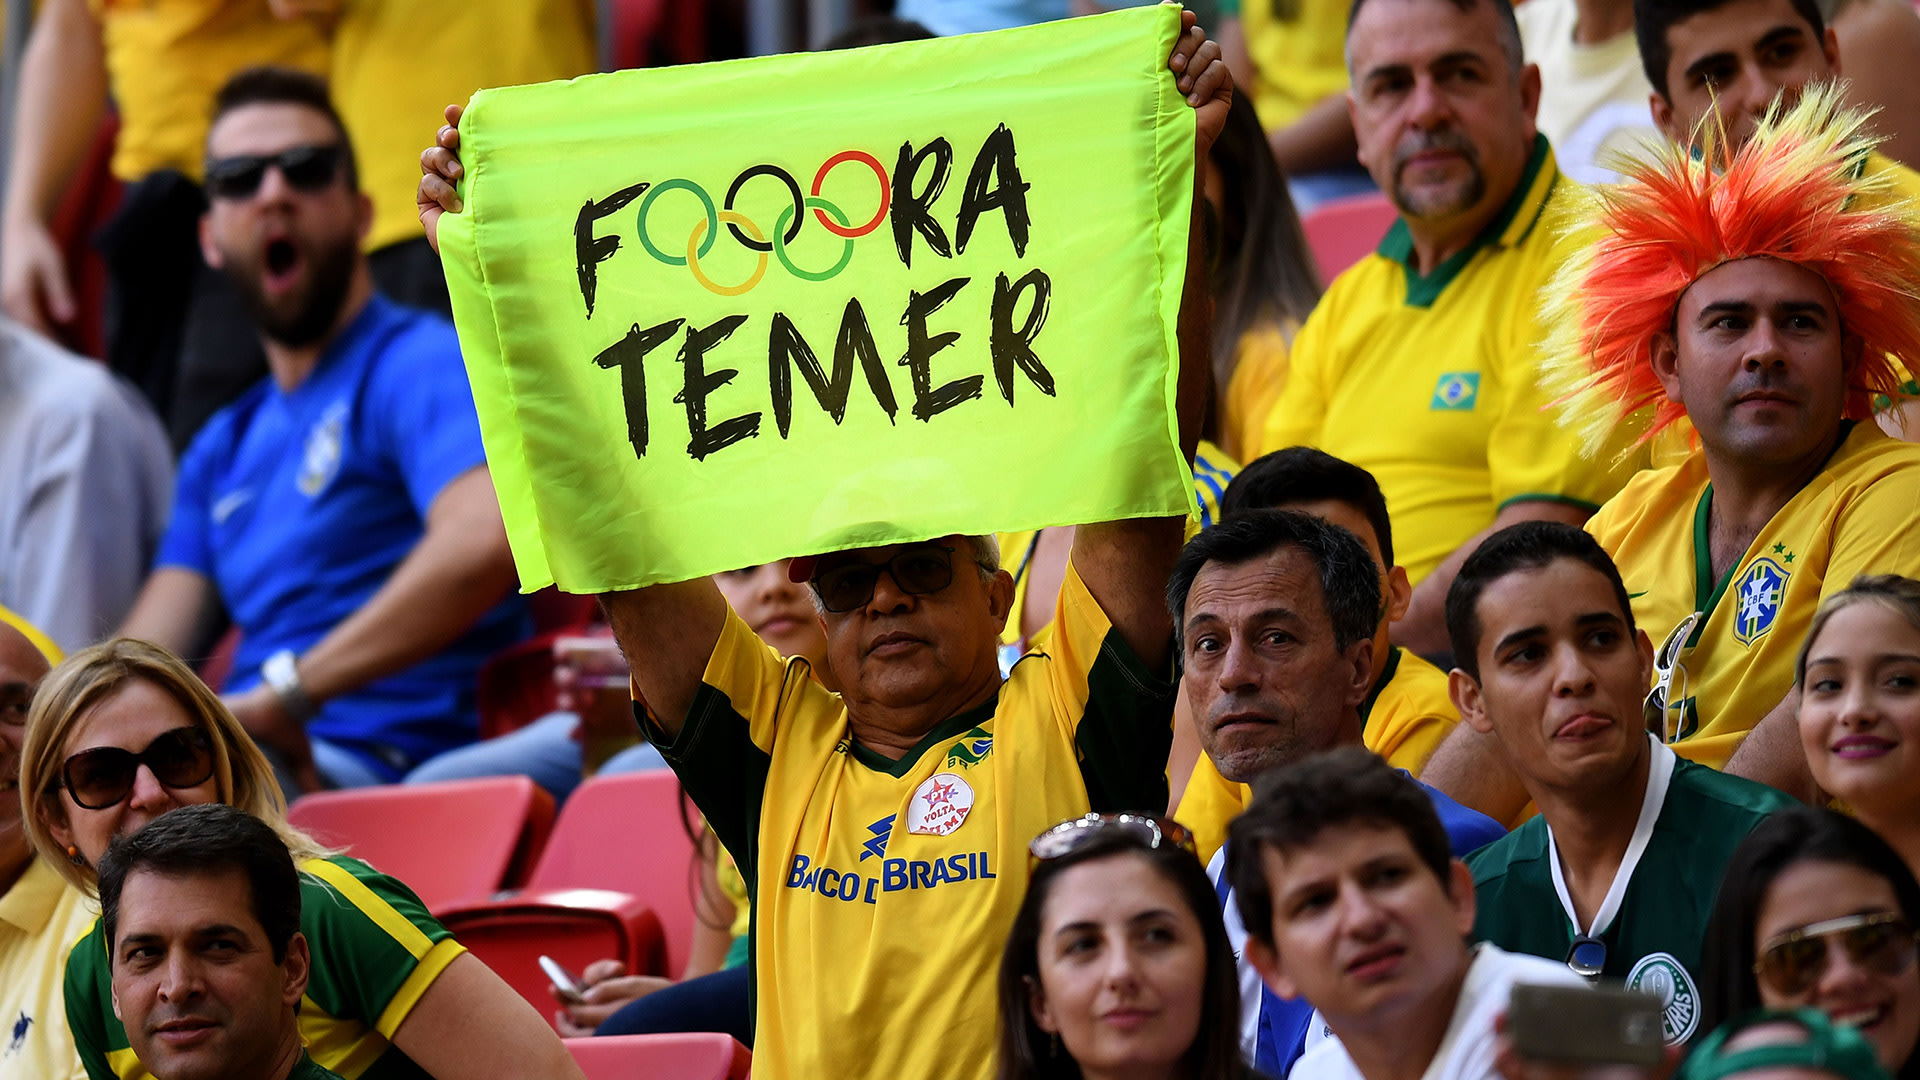 Fora Temer Fan Protest Brazil South Africa Rio 2016 Olympics 04082016